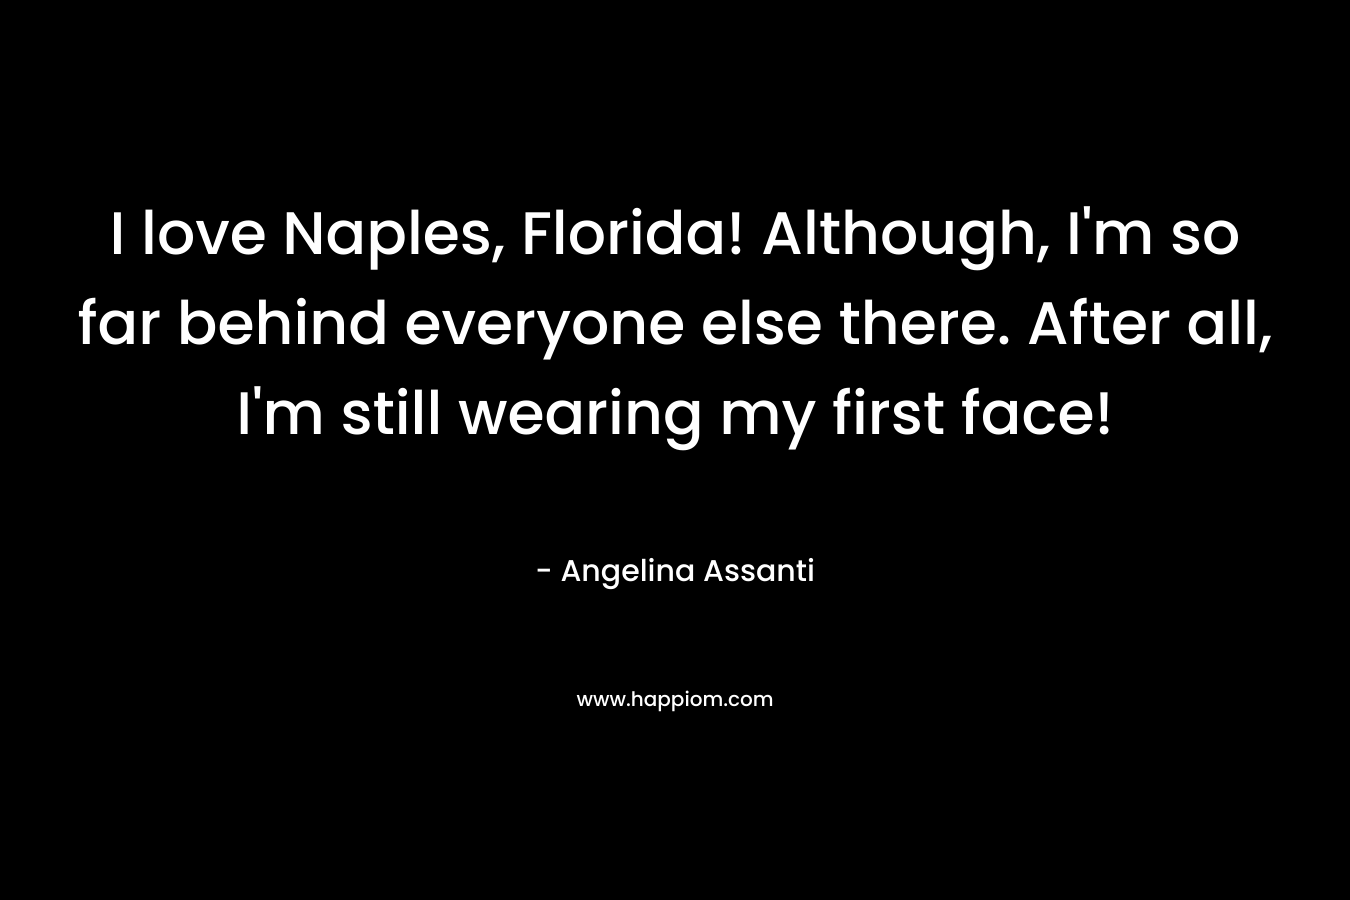 I love Naples, Florida! Although, I’m so far behind everyone else there. After all, I’m still wearing my first face! – Angelina Assanti